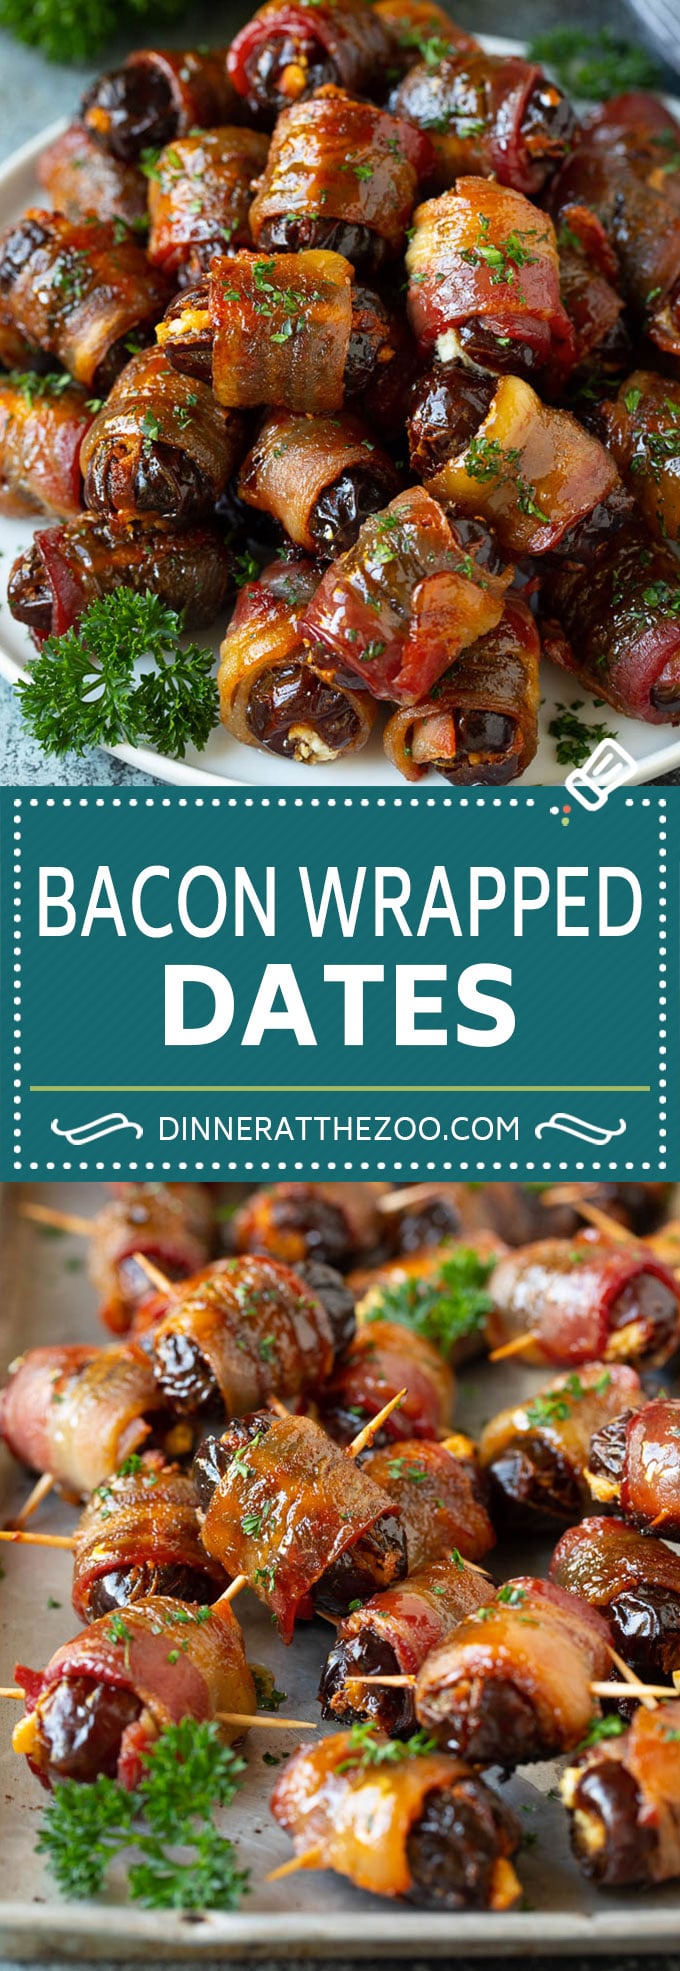 Bacon Wrapped Dates #appetizer #bacon #dates #cheese #dinneratthezoo